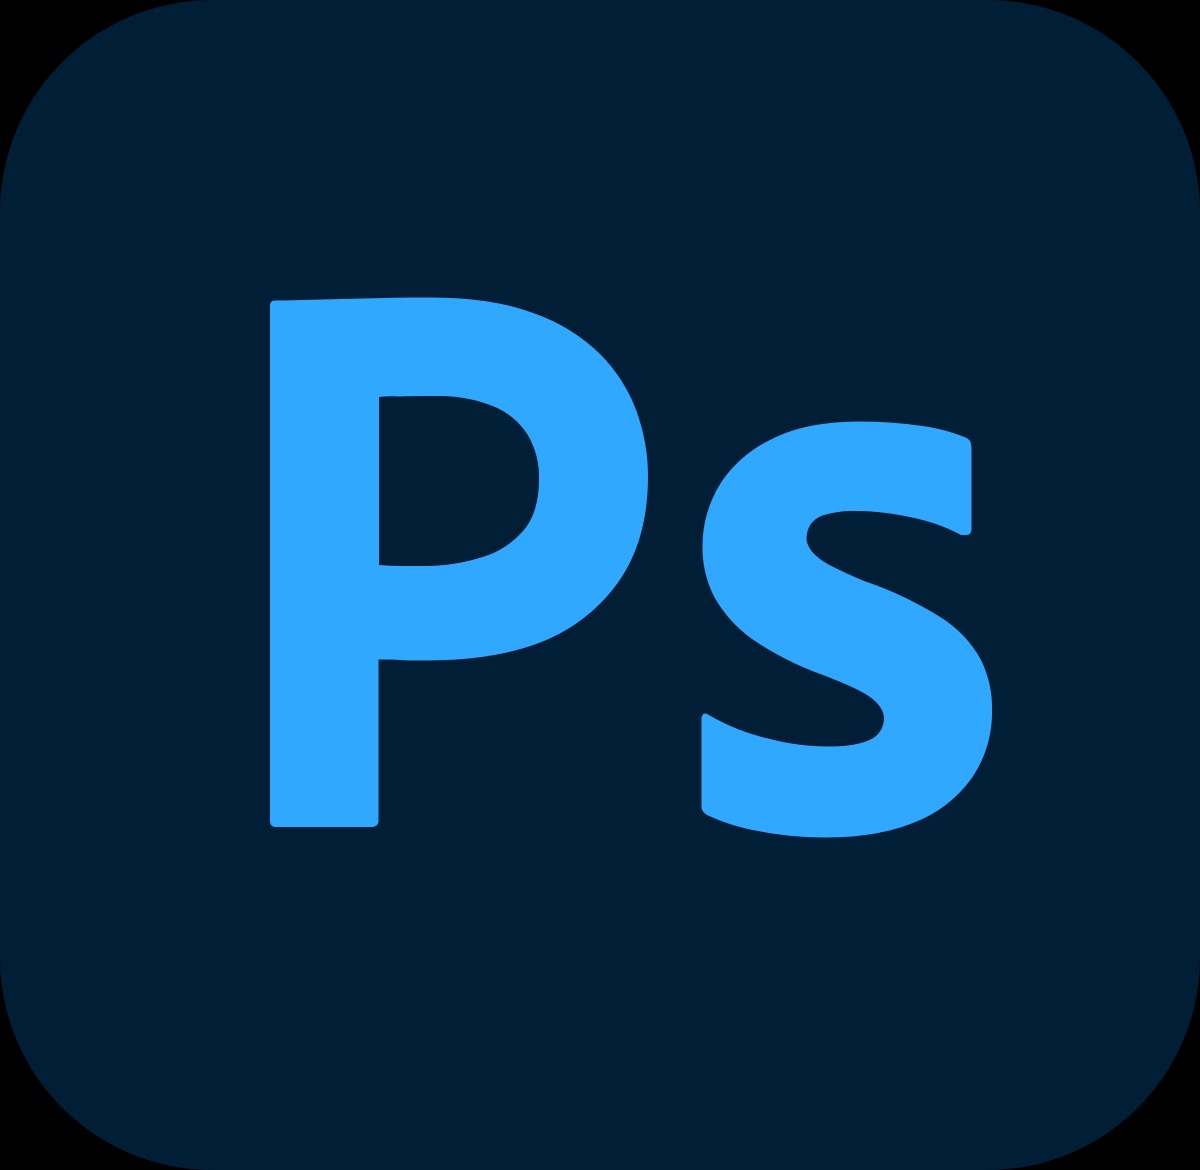 adobe photoshop drawing and editing tools